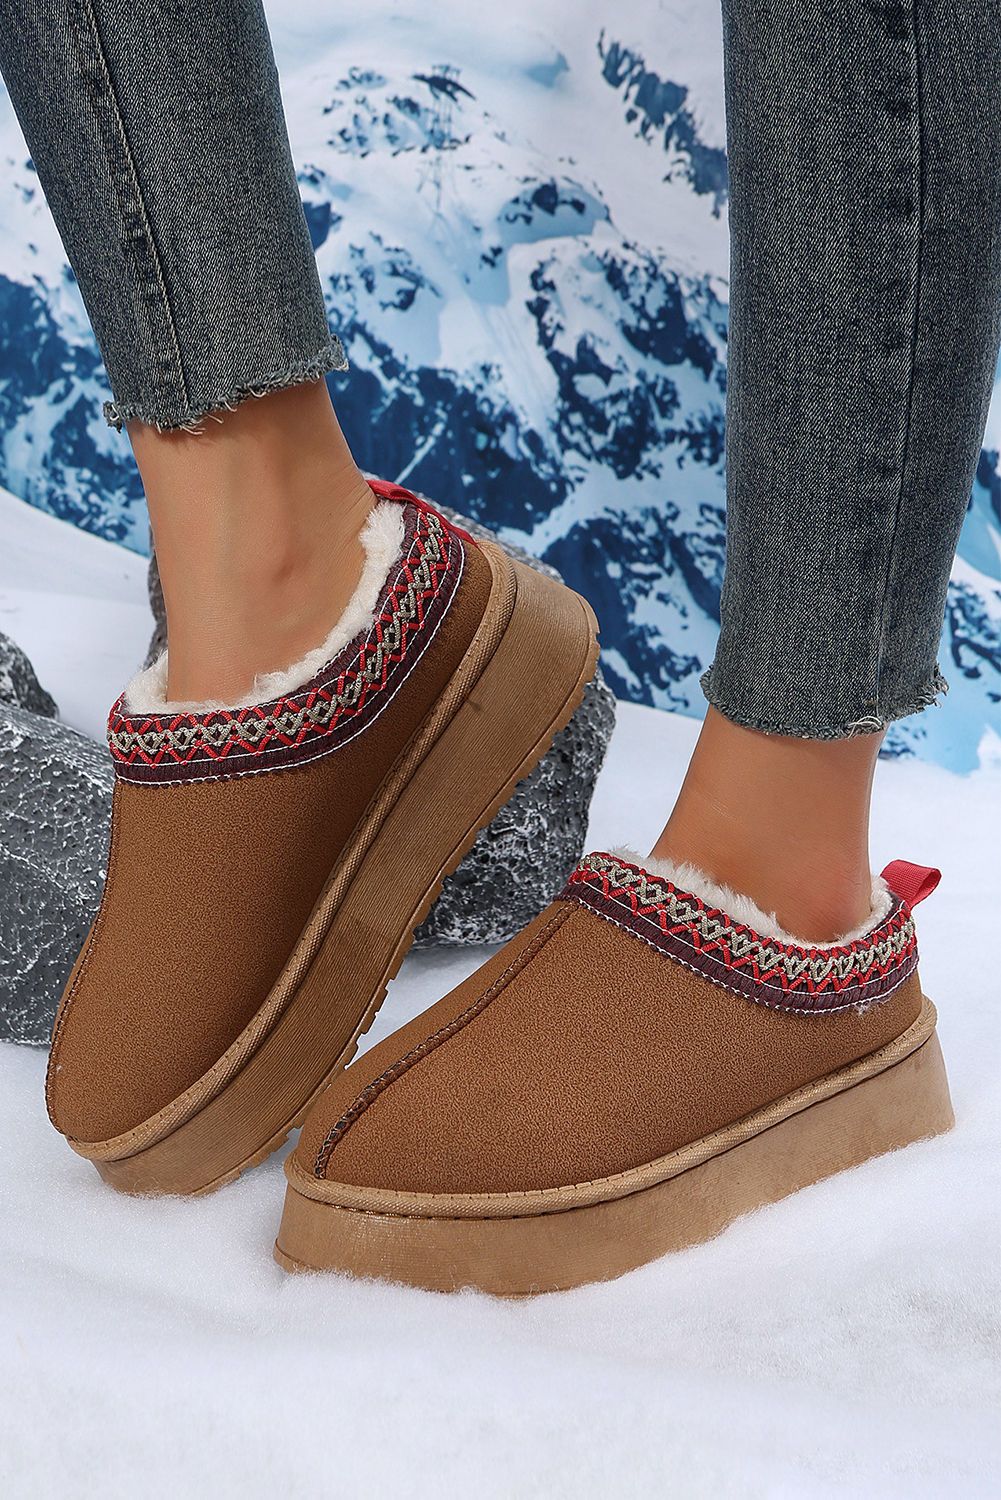 Shewin Wholesale High Quality Chestnut Suede Contrast Print Round Toe Plush Lined Flats